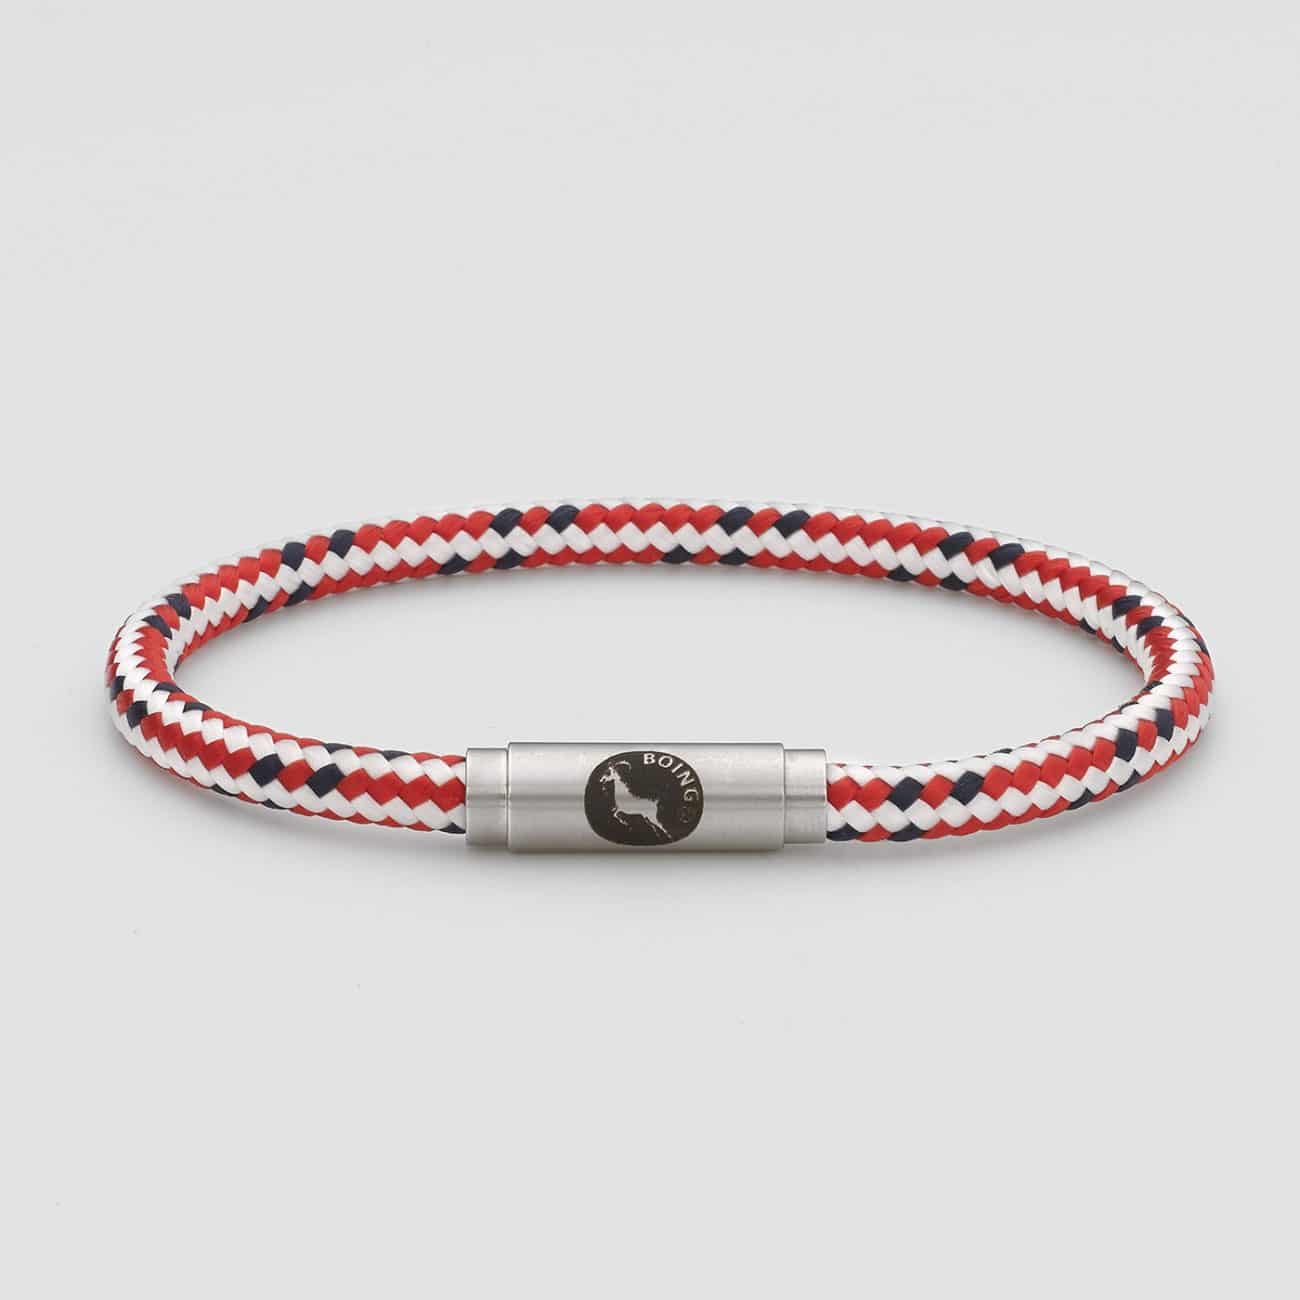 Red white and black sailing rope bracelet